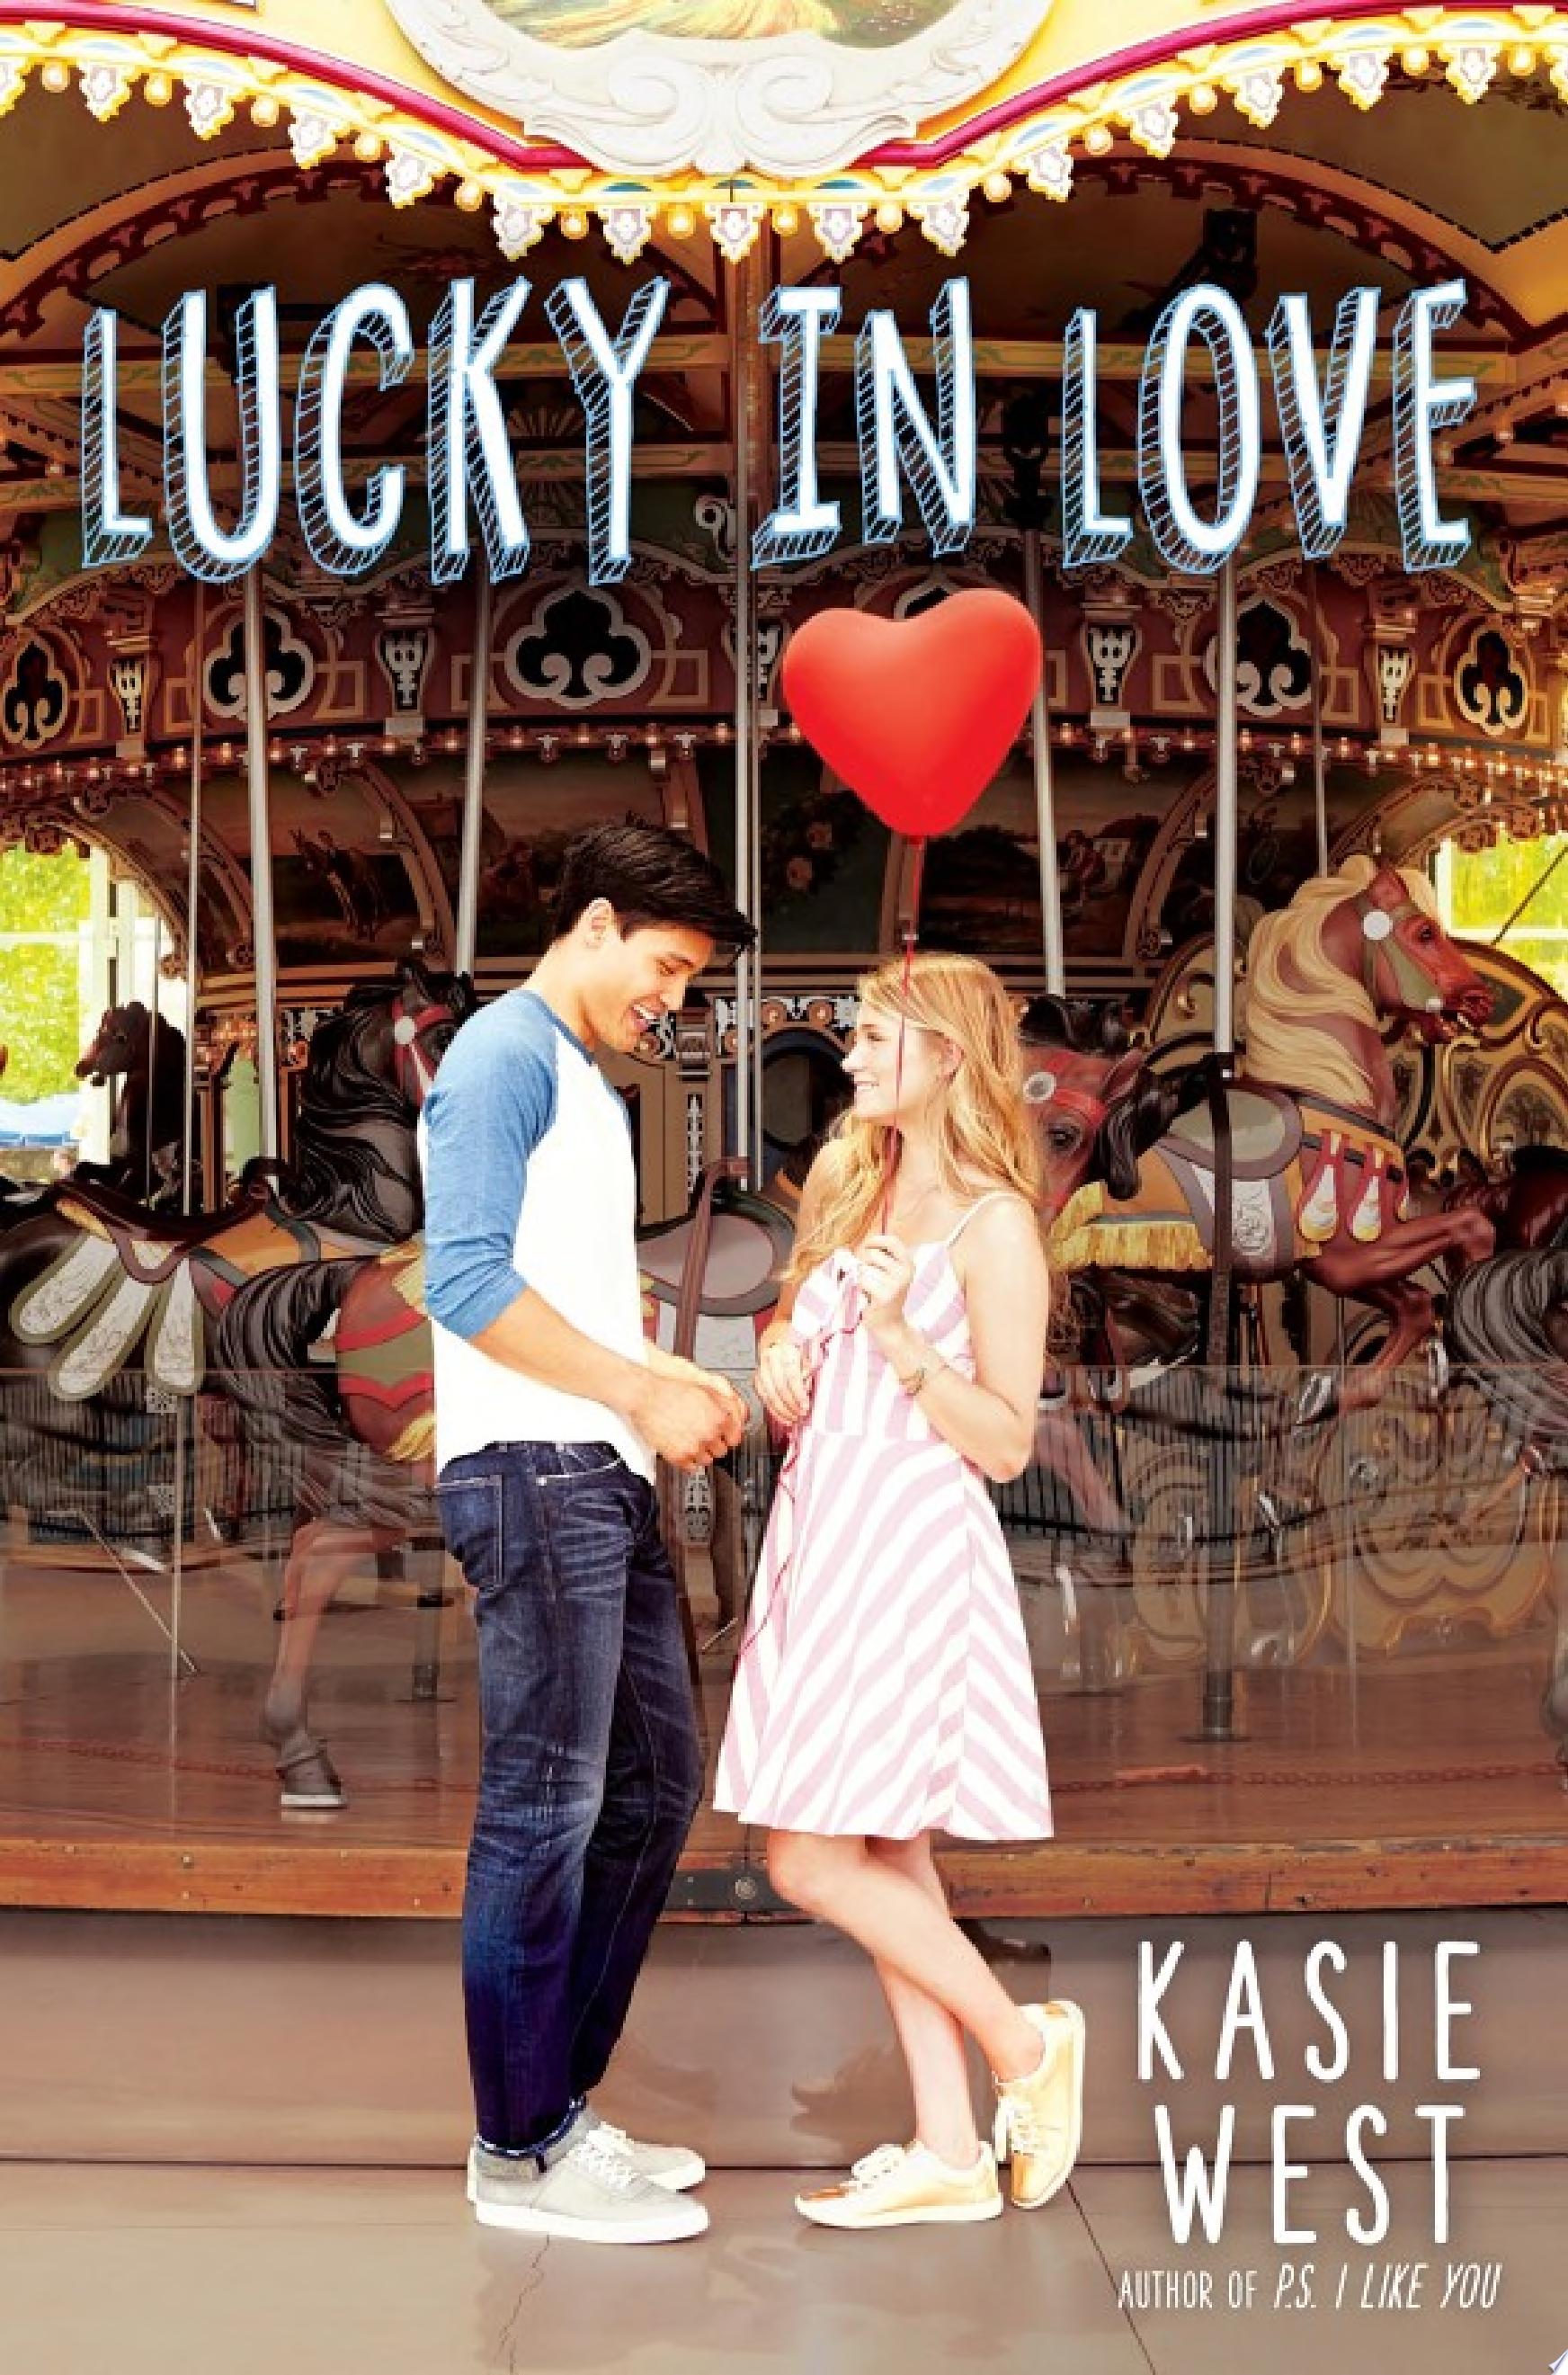 Image for "Lucky in Love"